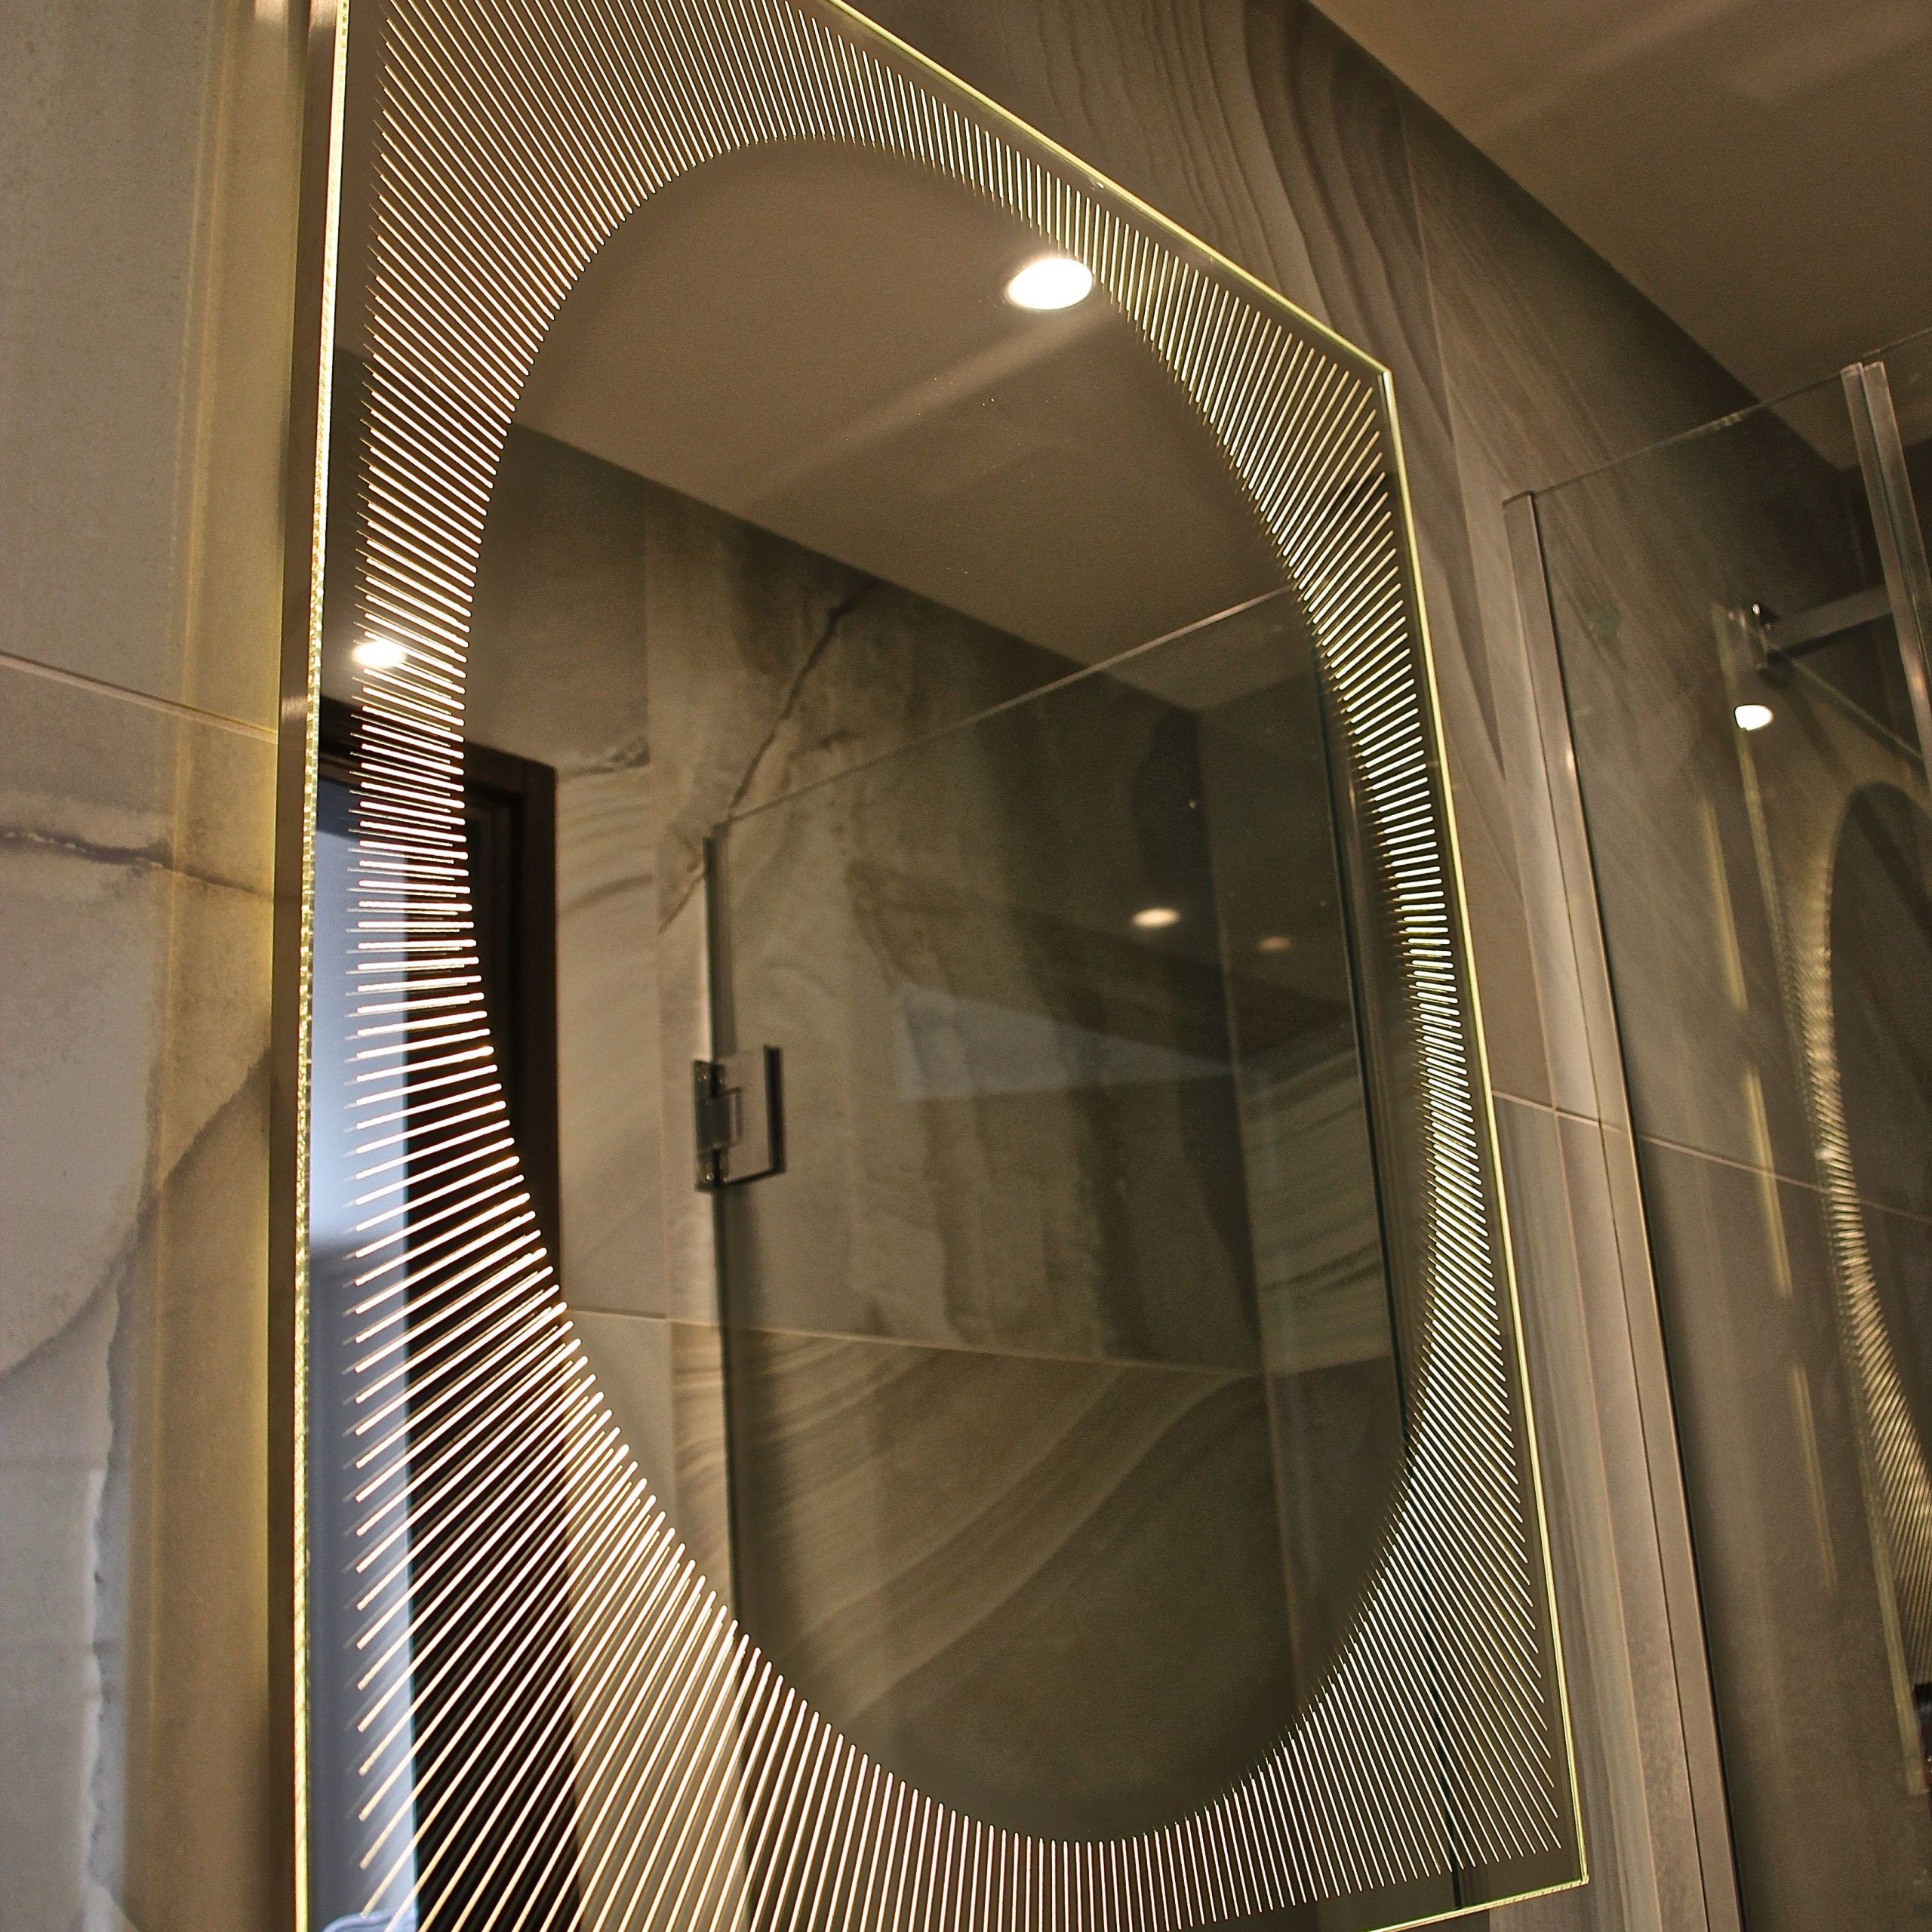 Pin On Back Illuminated Bathroom Mirrors Within Rounded Cut Edge Wall Mirrors (View 6 of 15)